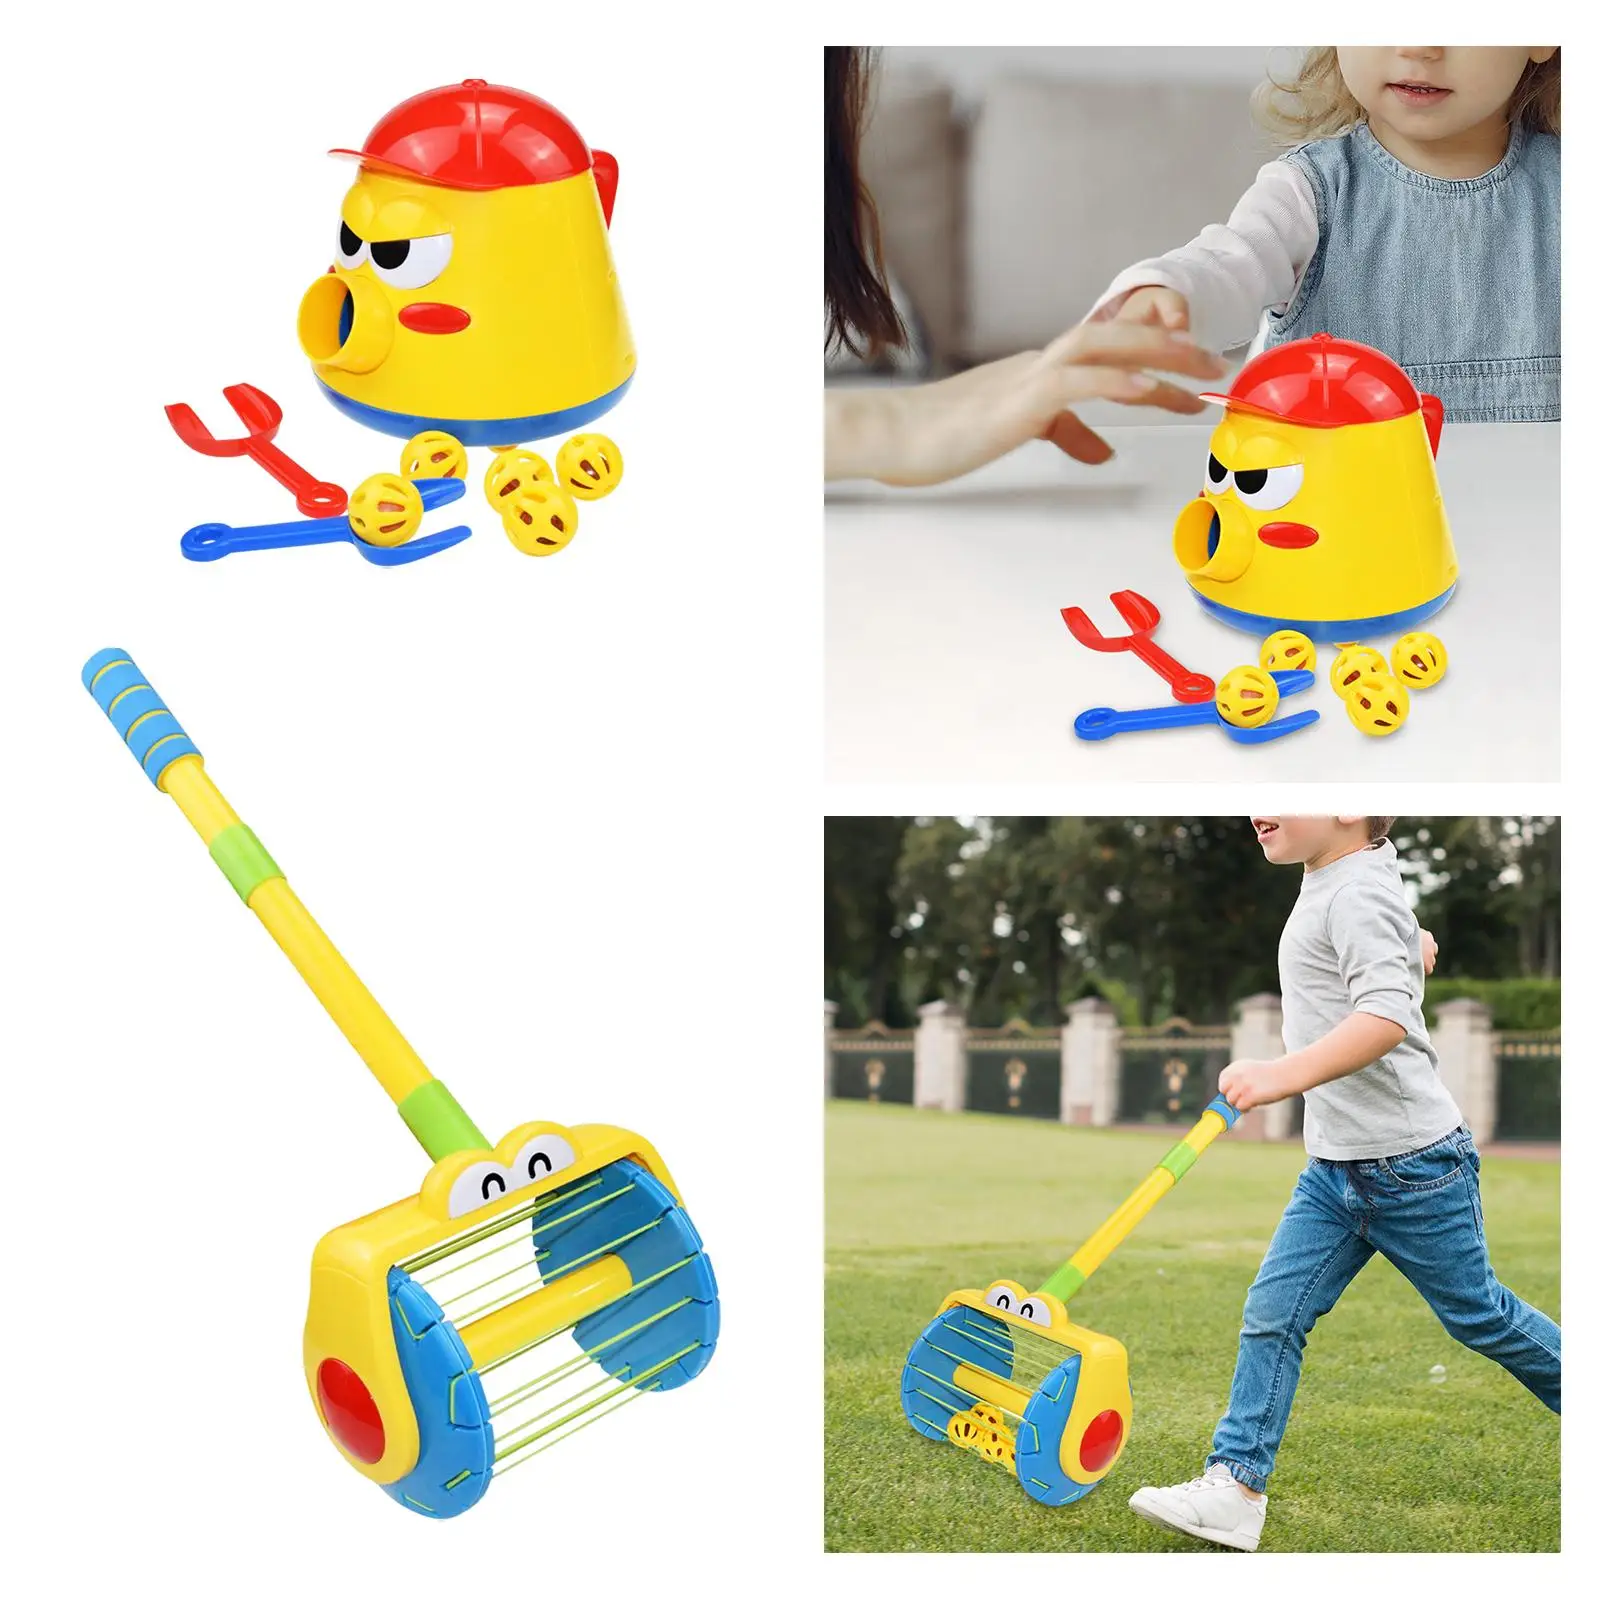 Outdoor Launching Ball Kids Toy Durable Material Baby Activity Toy Preschool